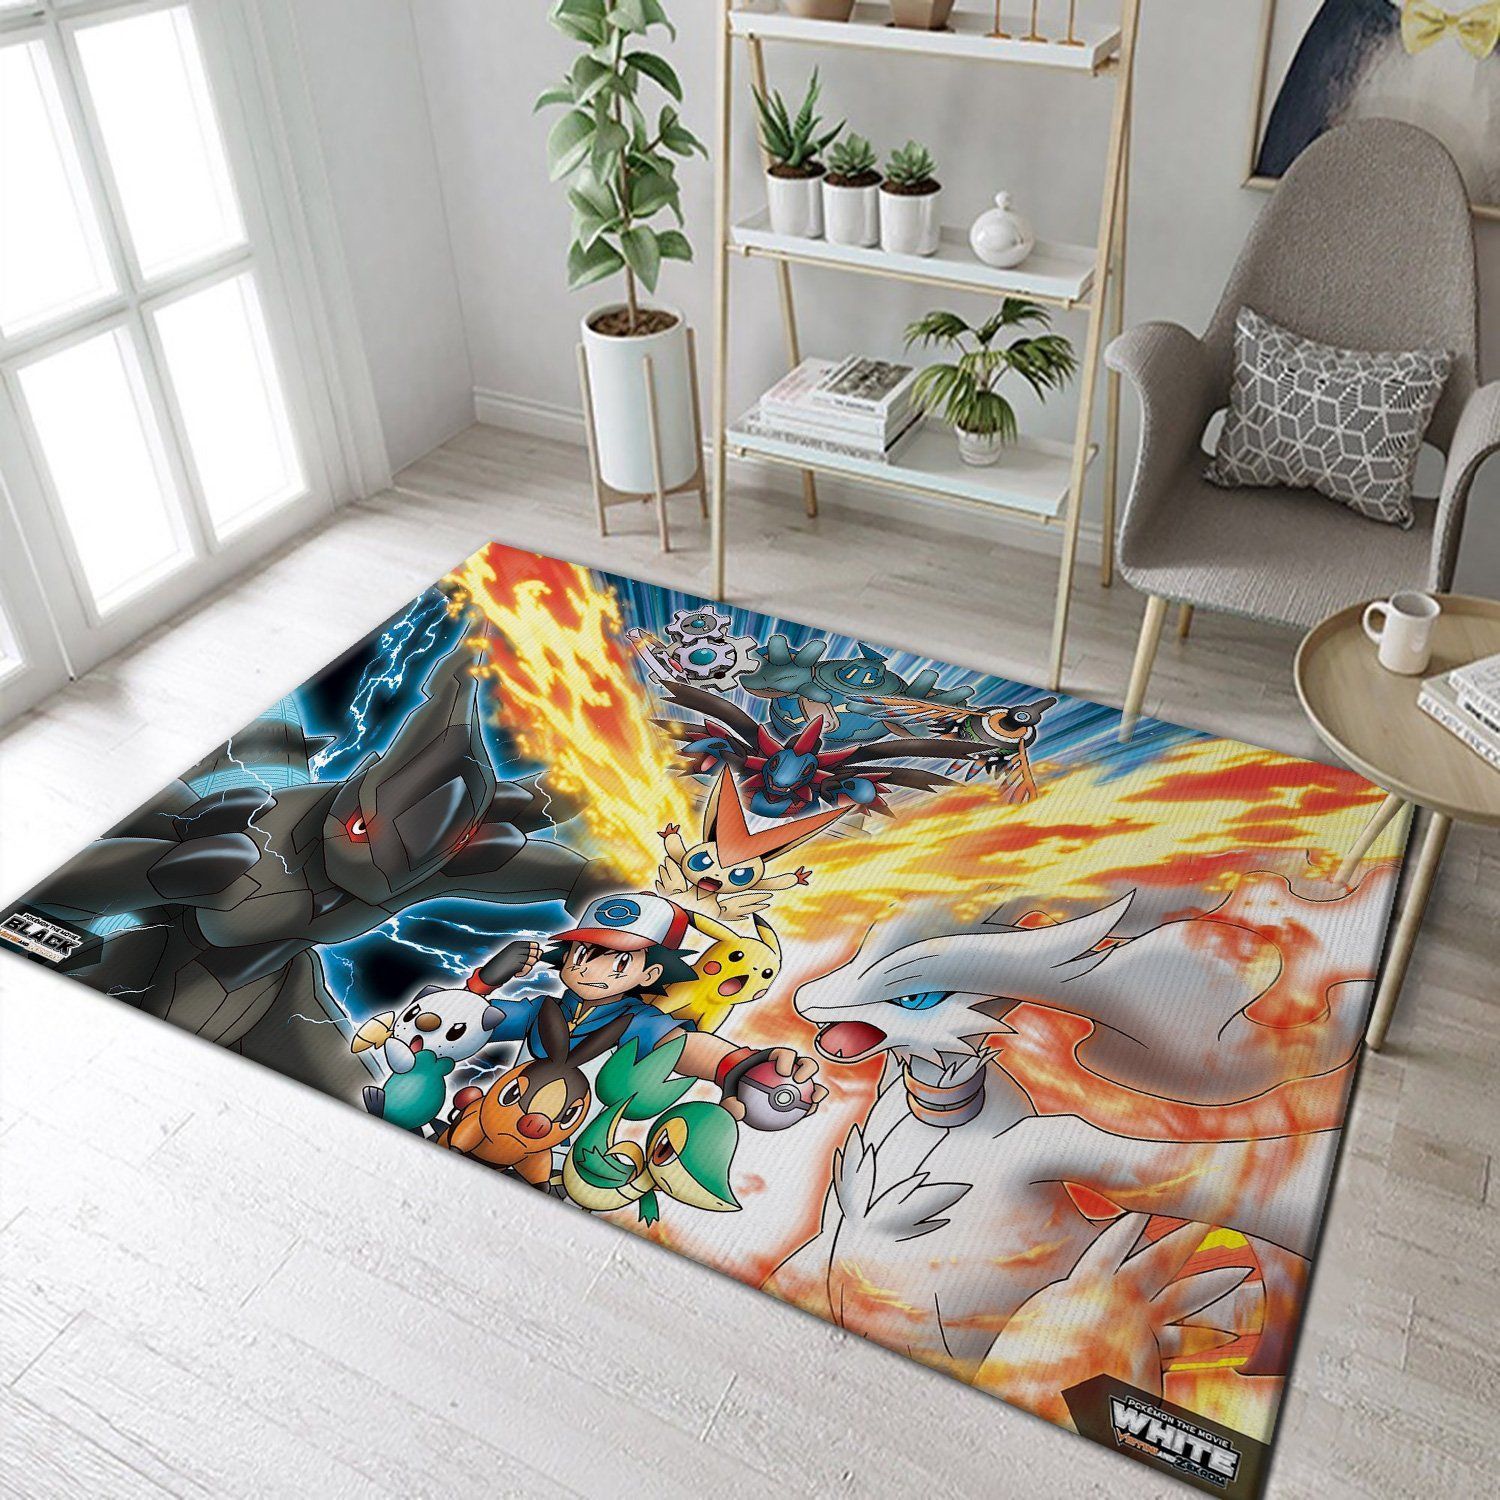 Pokemon Family Anime Movies Area Rugs Living Room Carpet FN031206 Local Brands Floor Decor The US Decor - Indoor Outdoor Rugs 2